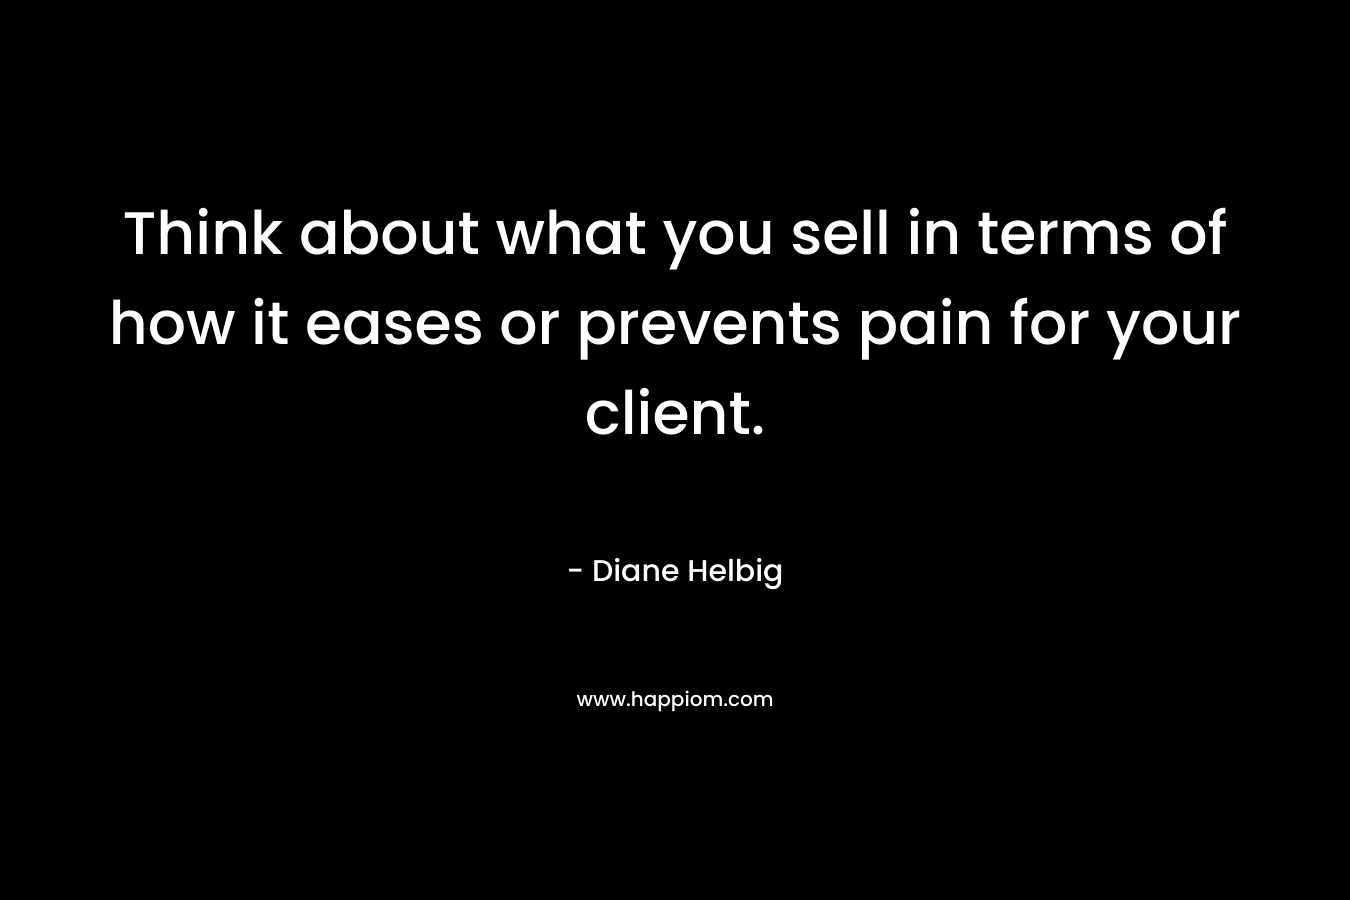 Think about what you sell in terms of how it eases or prevents pain for your client. – Diane Helbig